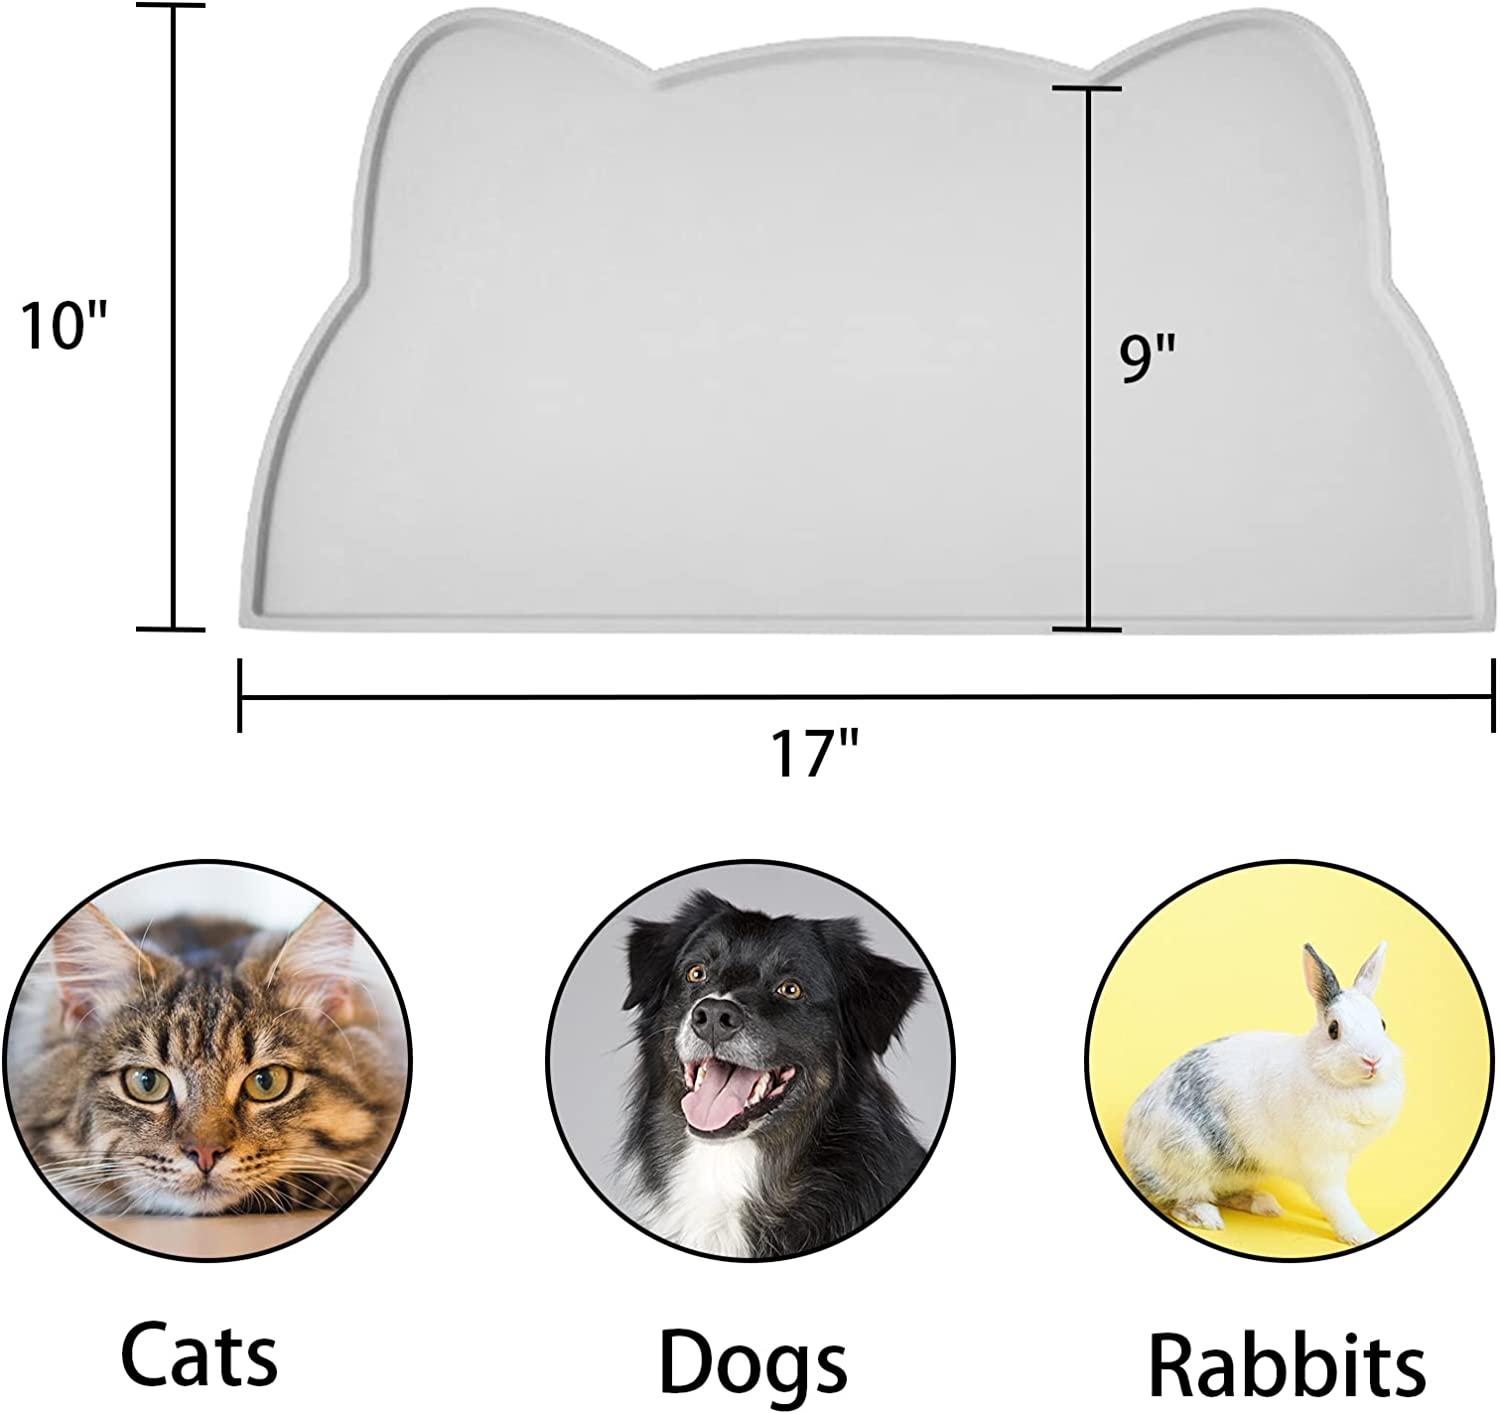 Silicone Pet Feeding Mat For Cat And Dog, Prevent Spillage And